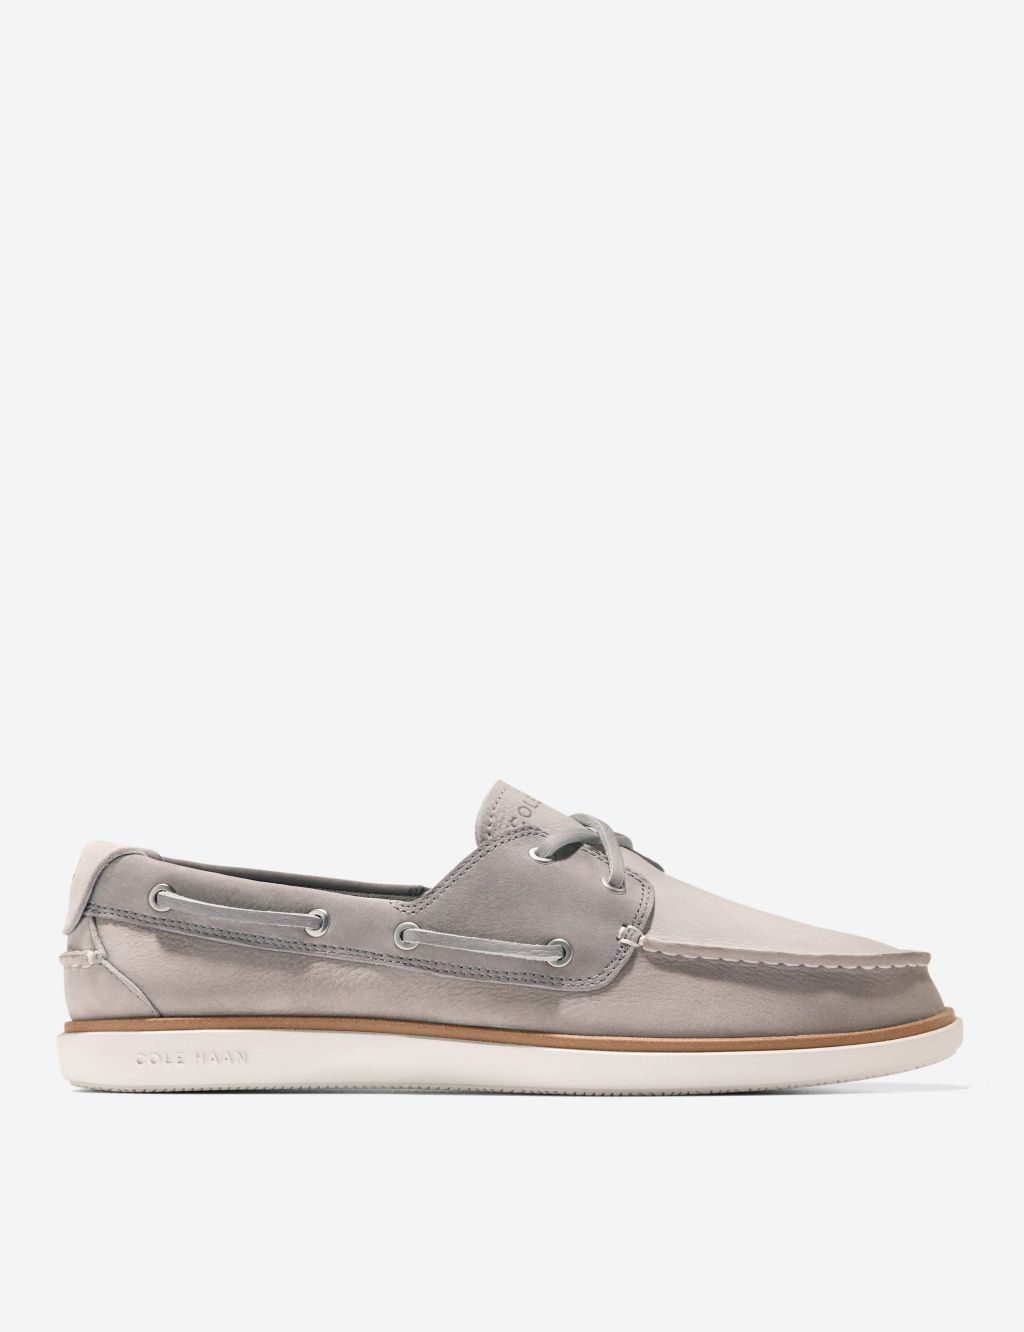 Leather Slip-On Boat Shoes